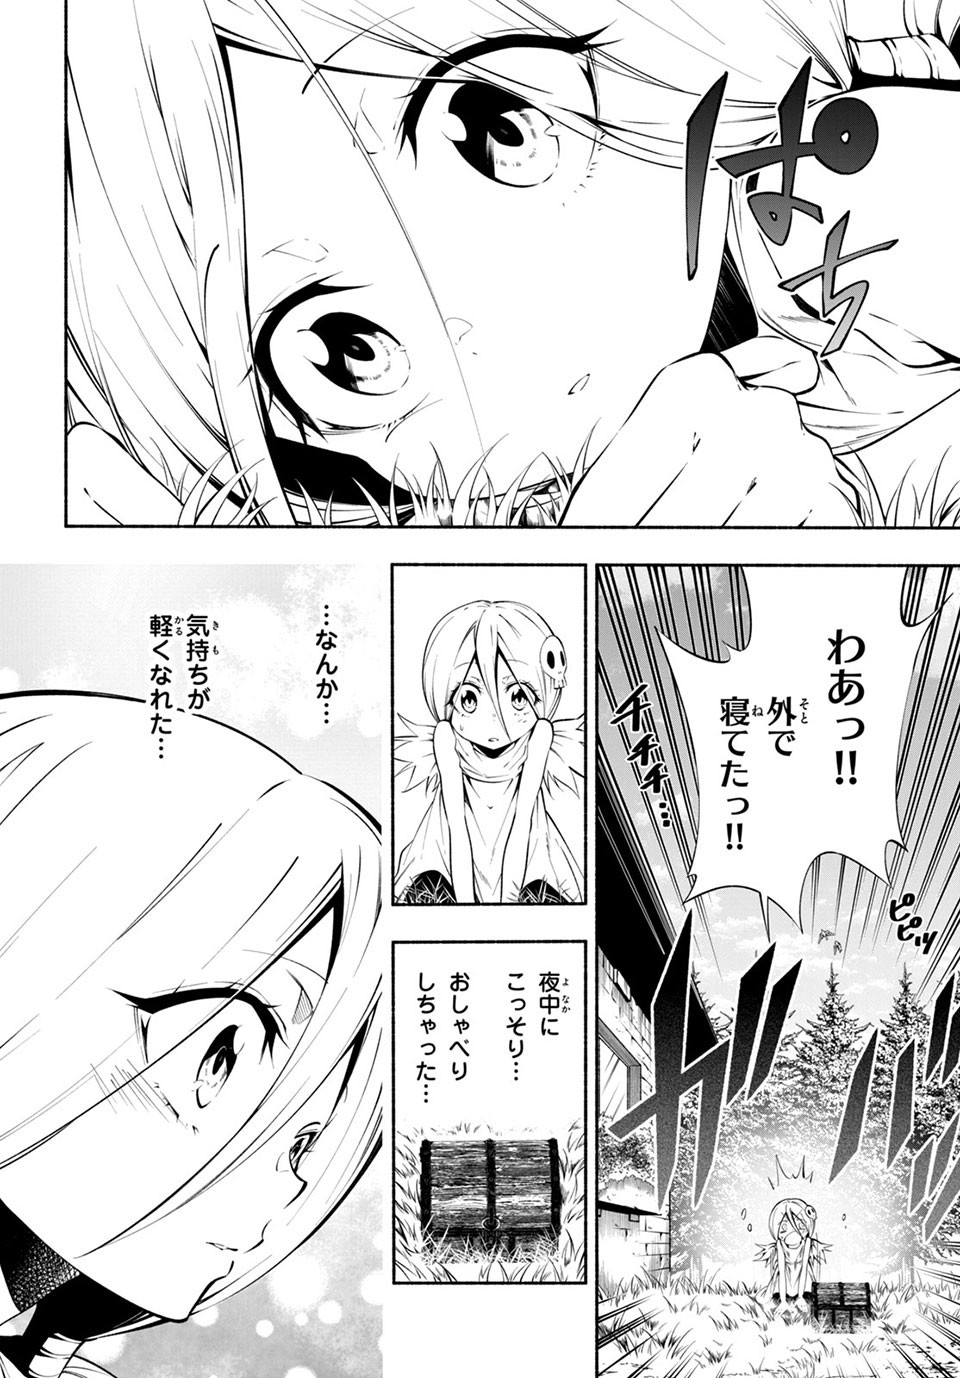 Shaman King: and a garden 第8.2話 - Page 1